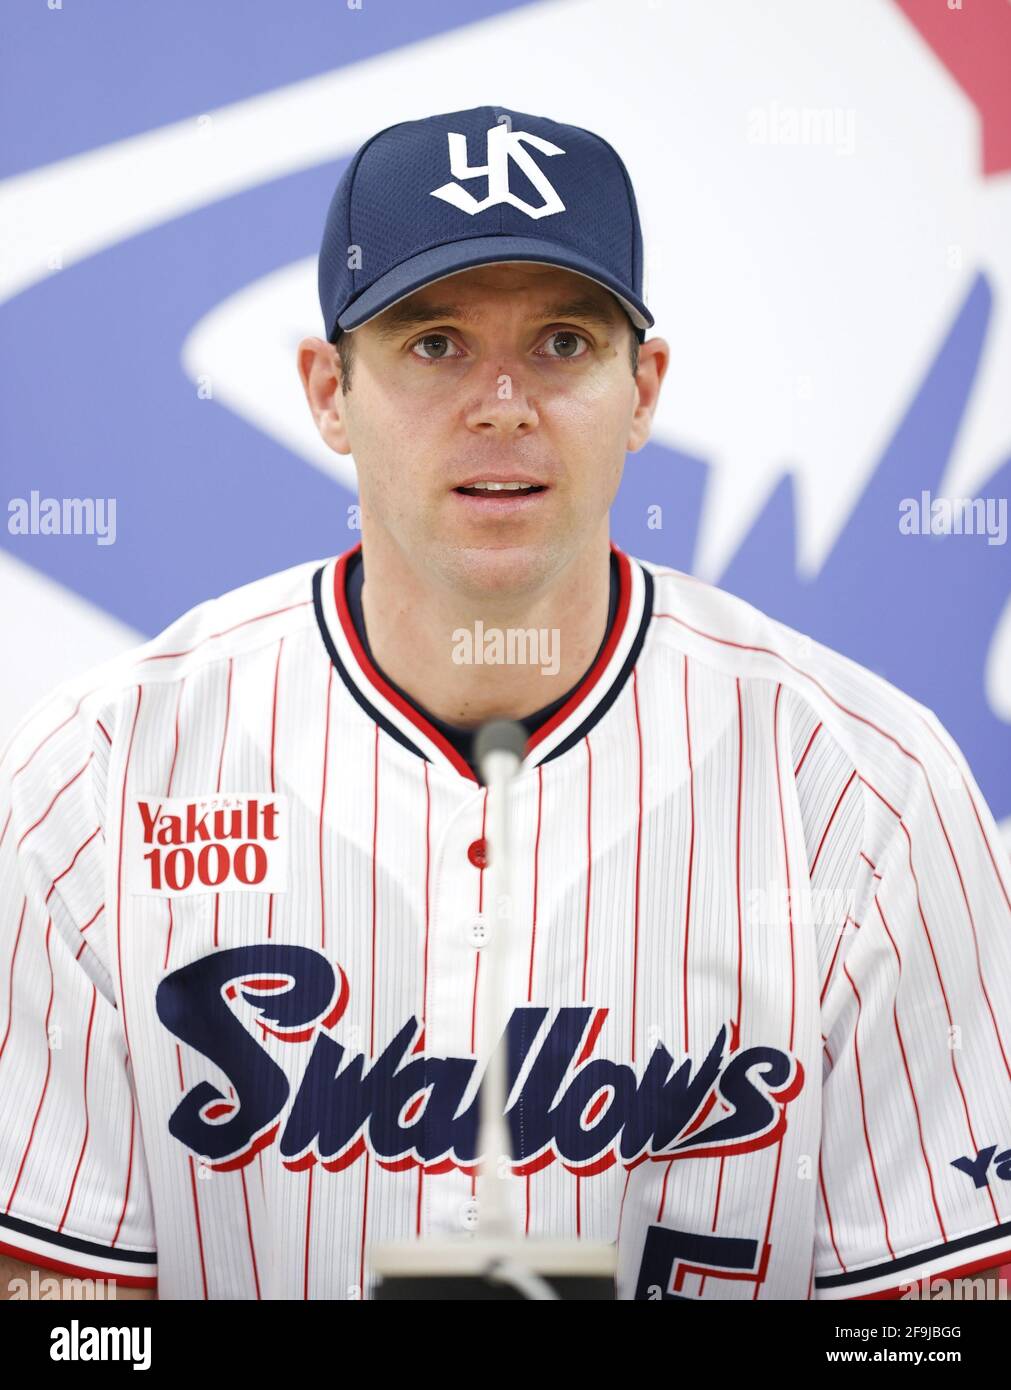 New Yakult Swallows pitcher Rick Vandenhurk attends an introductory press  conference in Tokyo on April 19, 2021. The right-hander has a 43-19 career  record with a 3.68 ERA in Japan between 2015